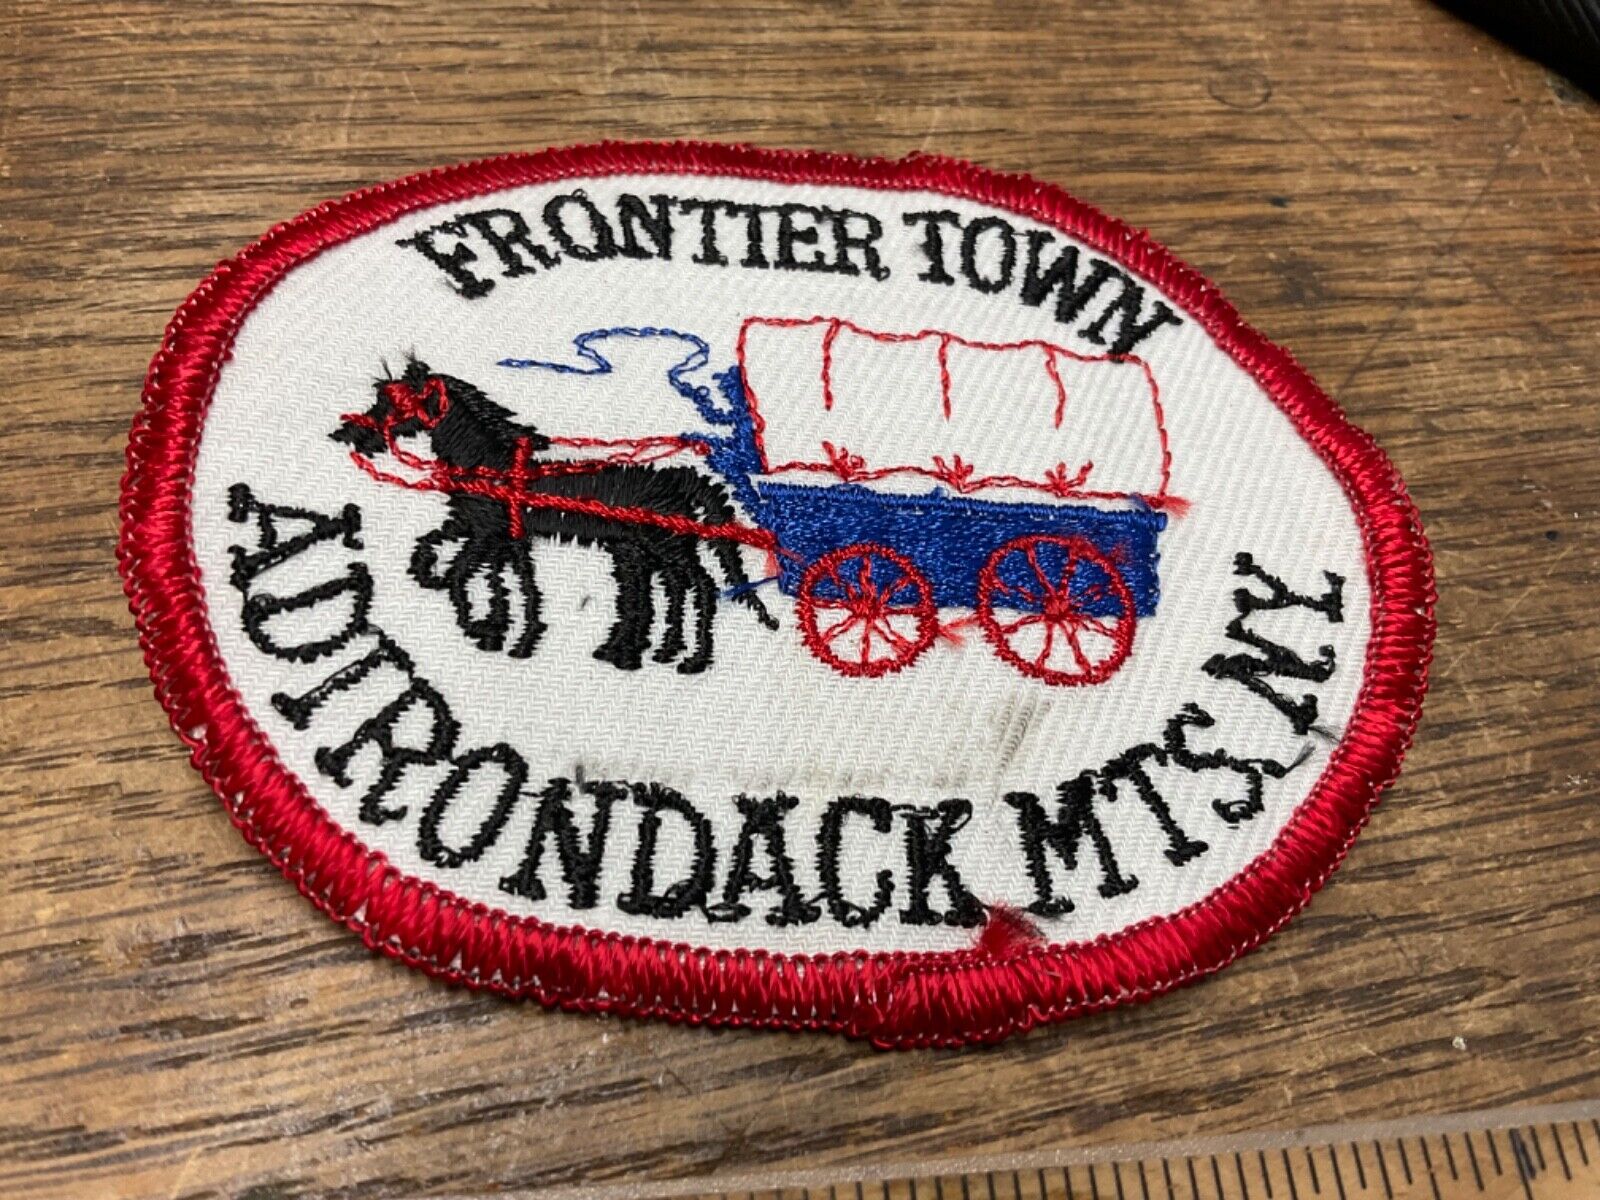 Frontier Town Adironback Mtns NY New York Vintage Patch